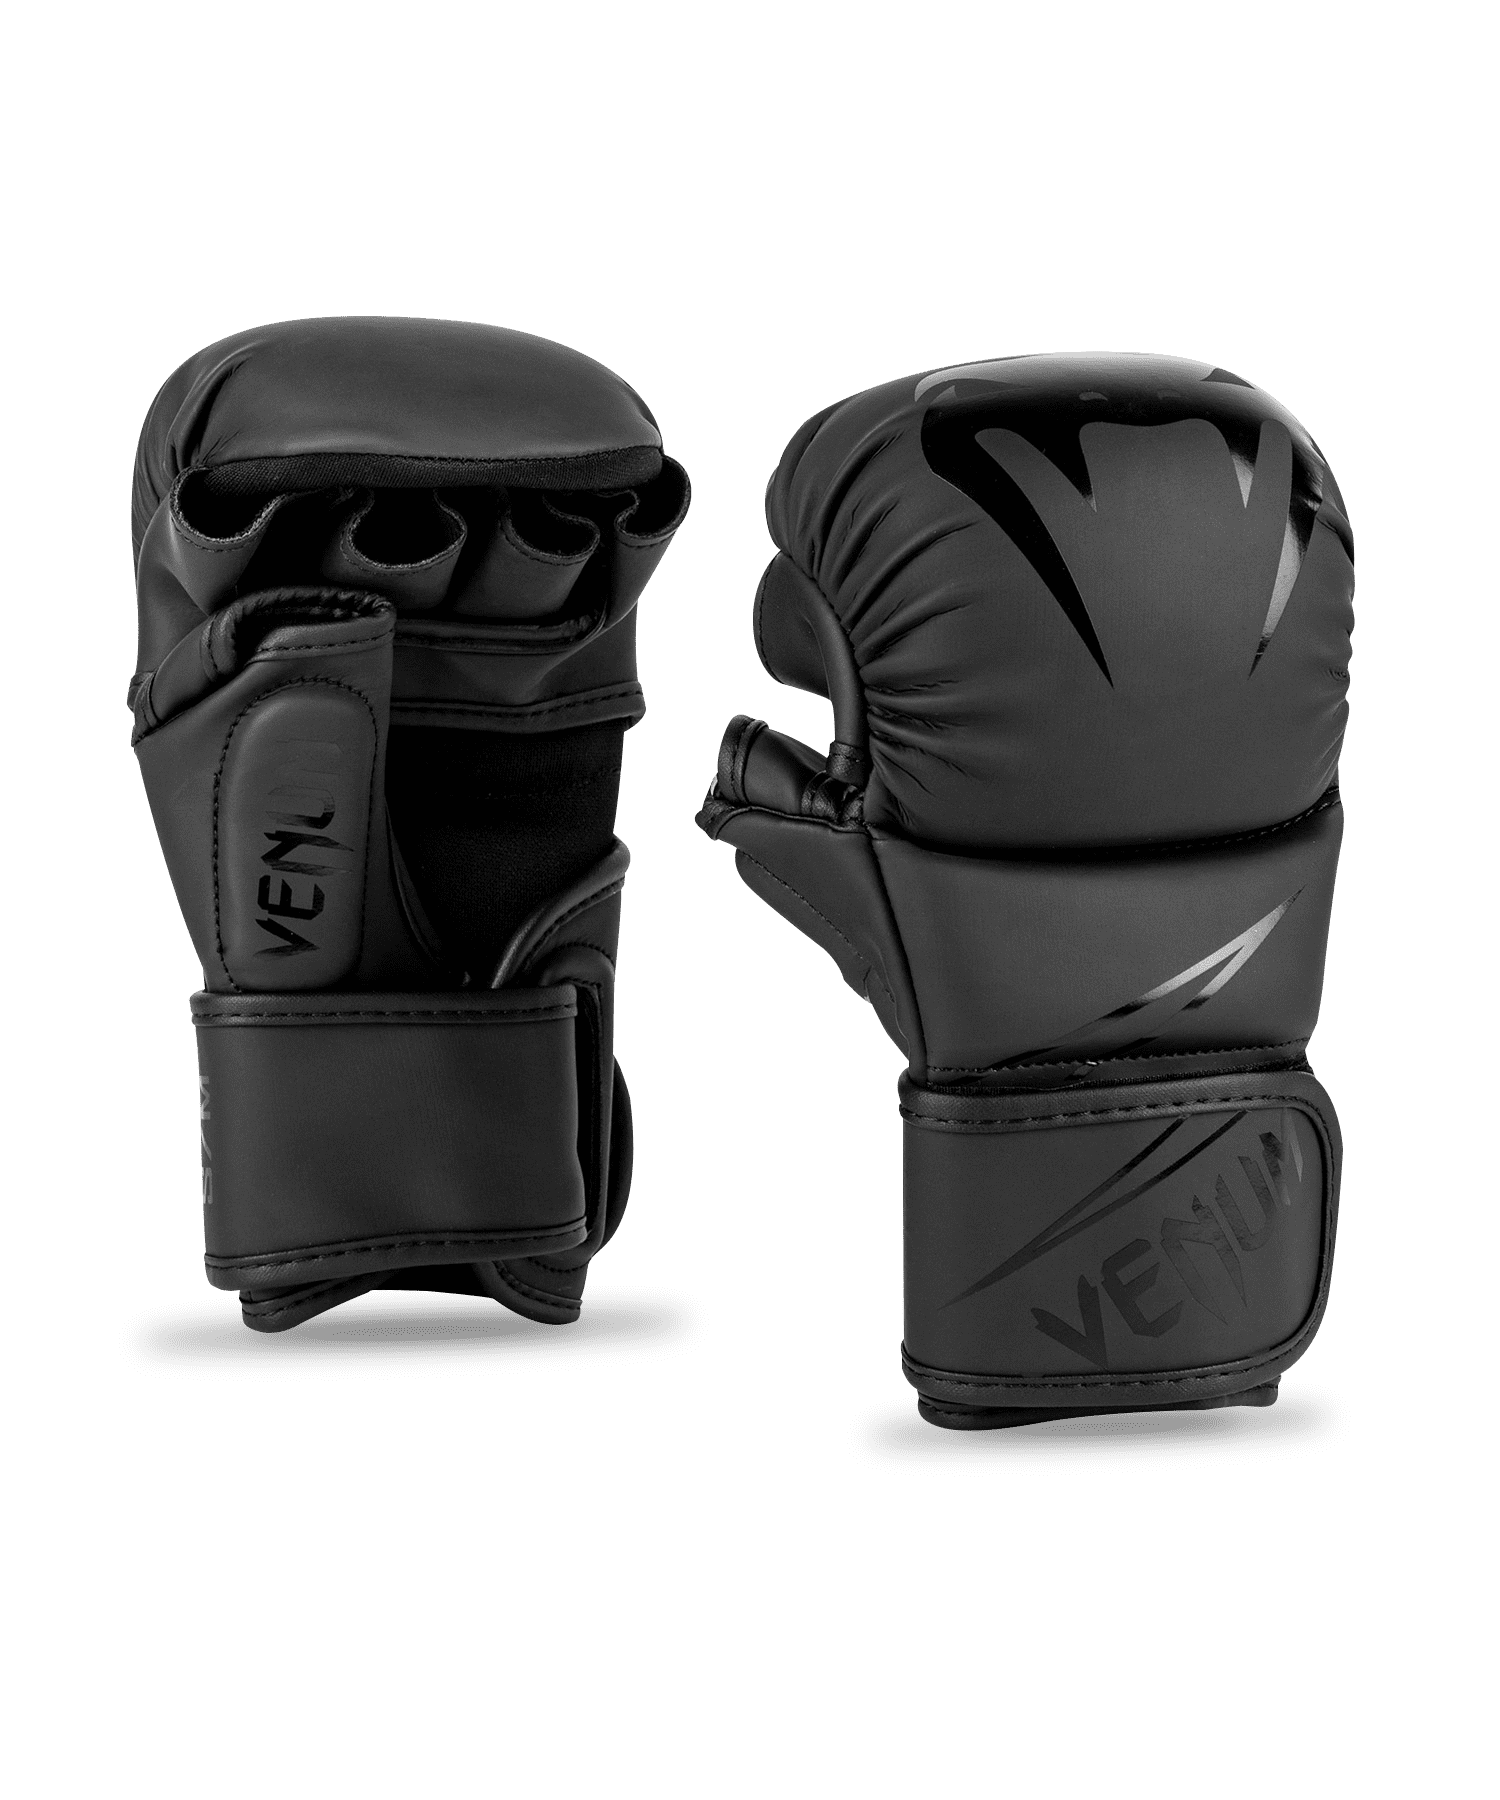 BLE/BLK MMA Safety Sparring Gloves in Genuine Leather Quality Free Shipping 